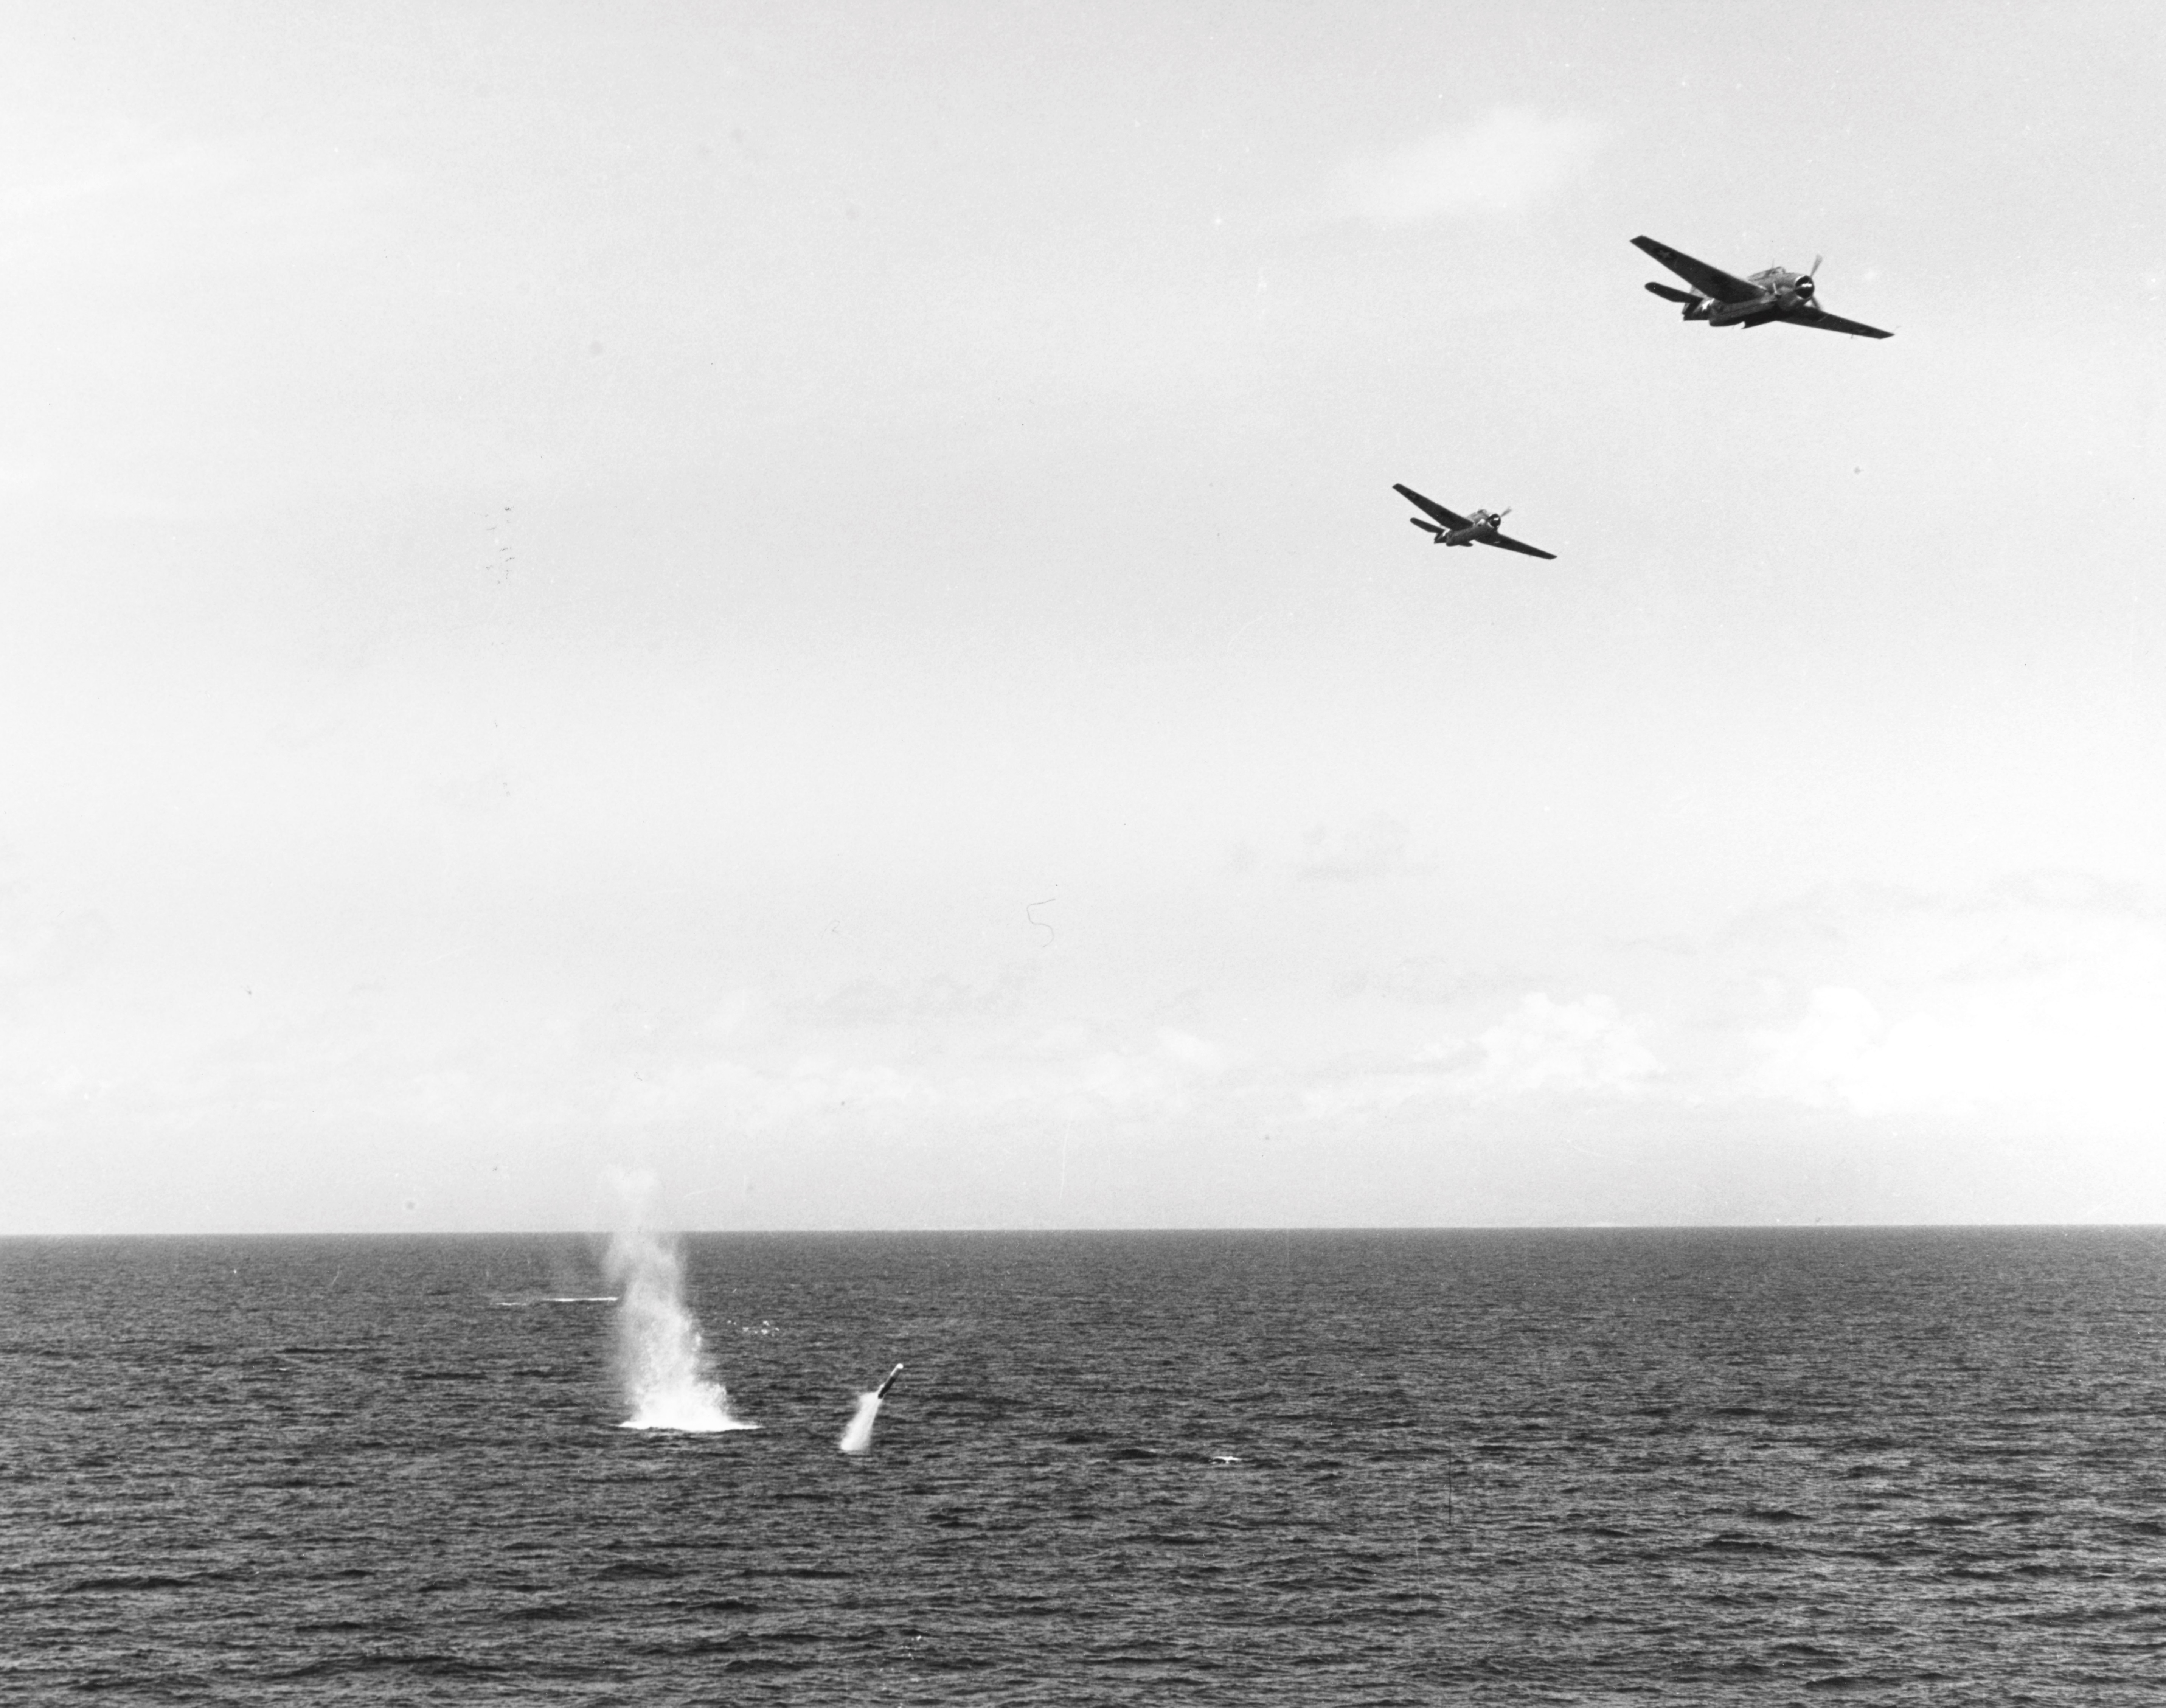 TBF-1 Avengers from the Carrier USS Essex dropping a practice torpedo from 150-200 feet, Gulf of Paria, Trinidad, 30 Mar 1943.  Note the porpoising early Mark XIII torpedo.